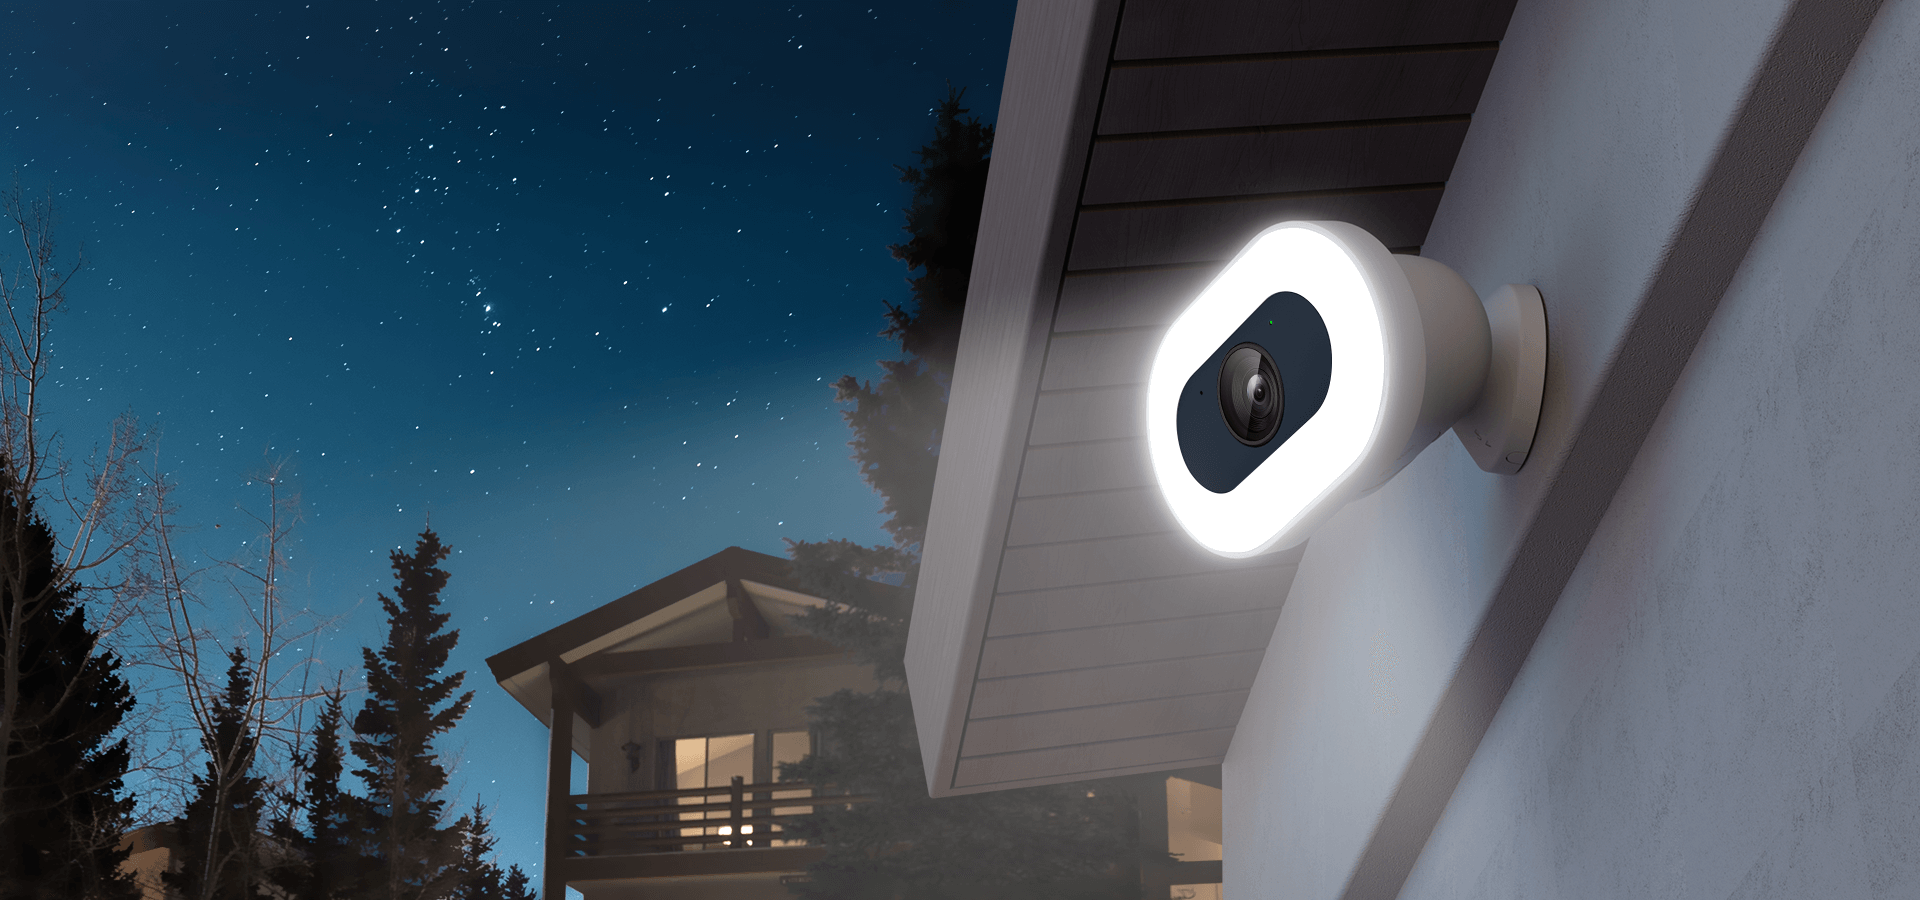 India Smart Home Security Camera Market Grows 116% YoY in Q2 2022; Xiaomi, Tapo, Imou Lead